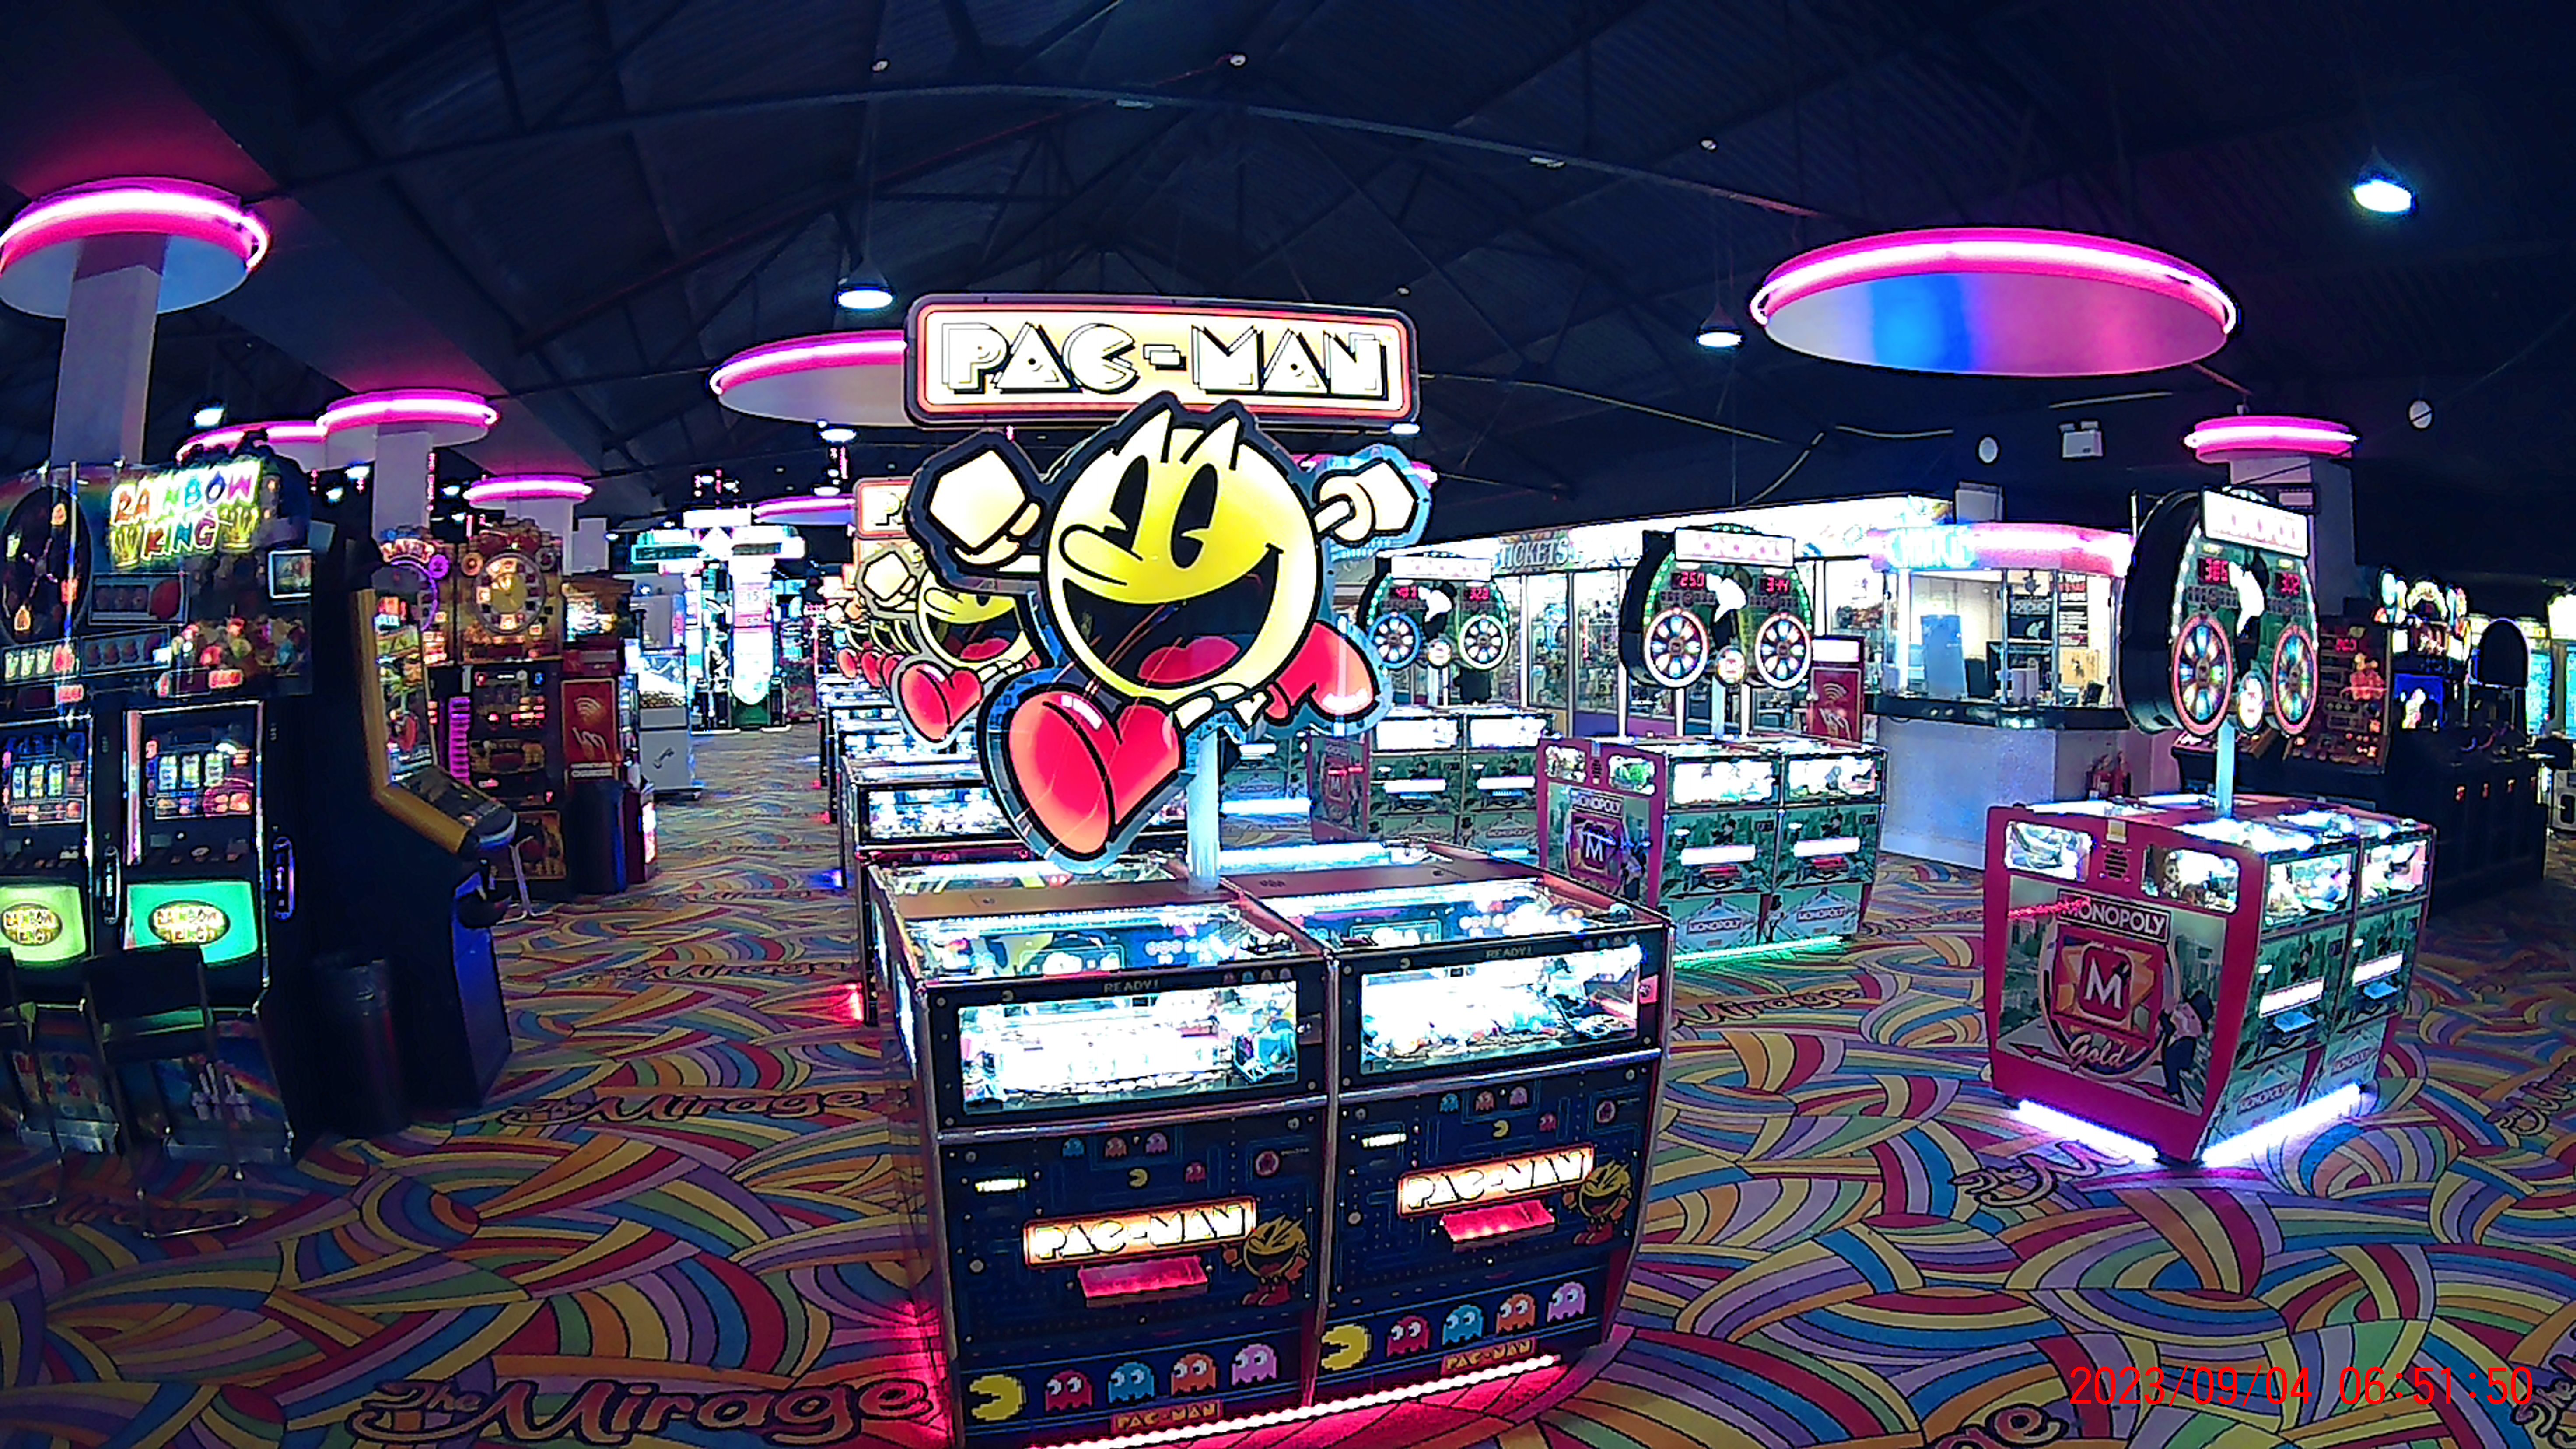 Photo of an arcade taken with the night camera on the SJCAM SJ20 action camera